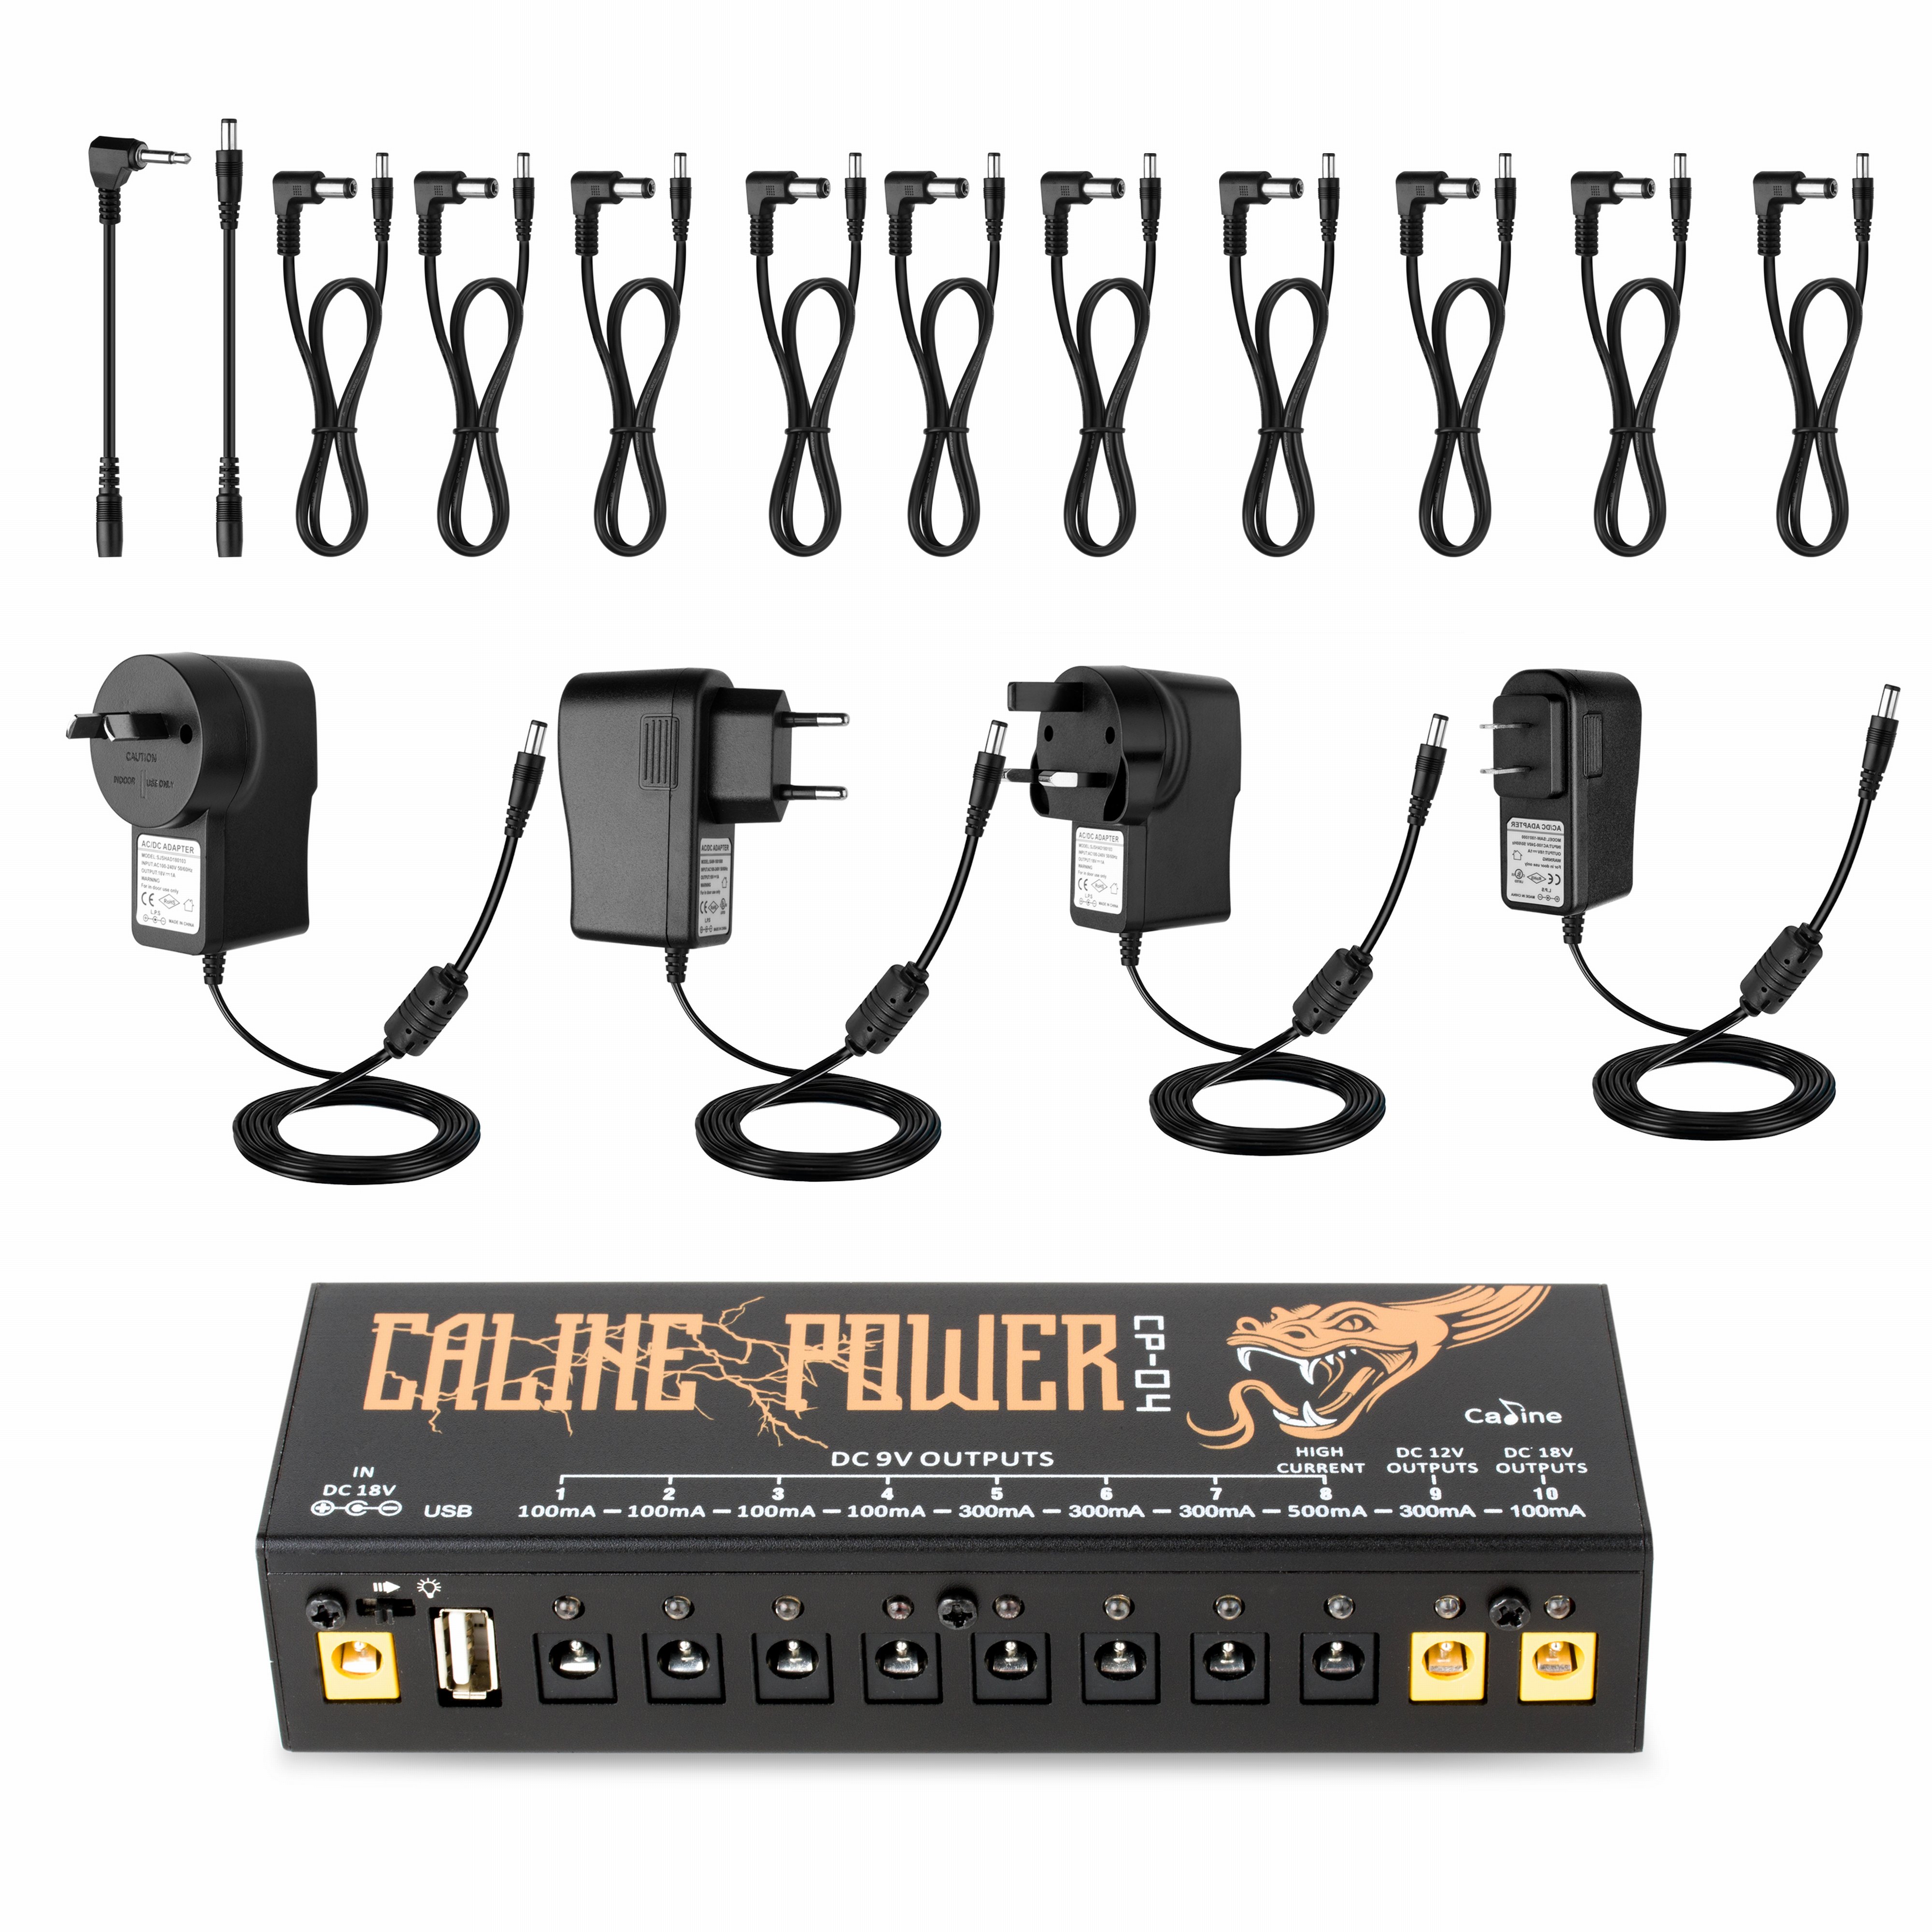 Caline CP-04 Pedal Power Supply with USB Port